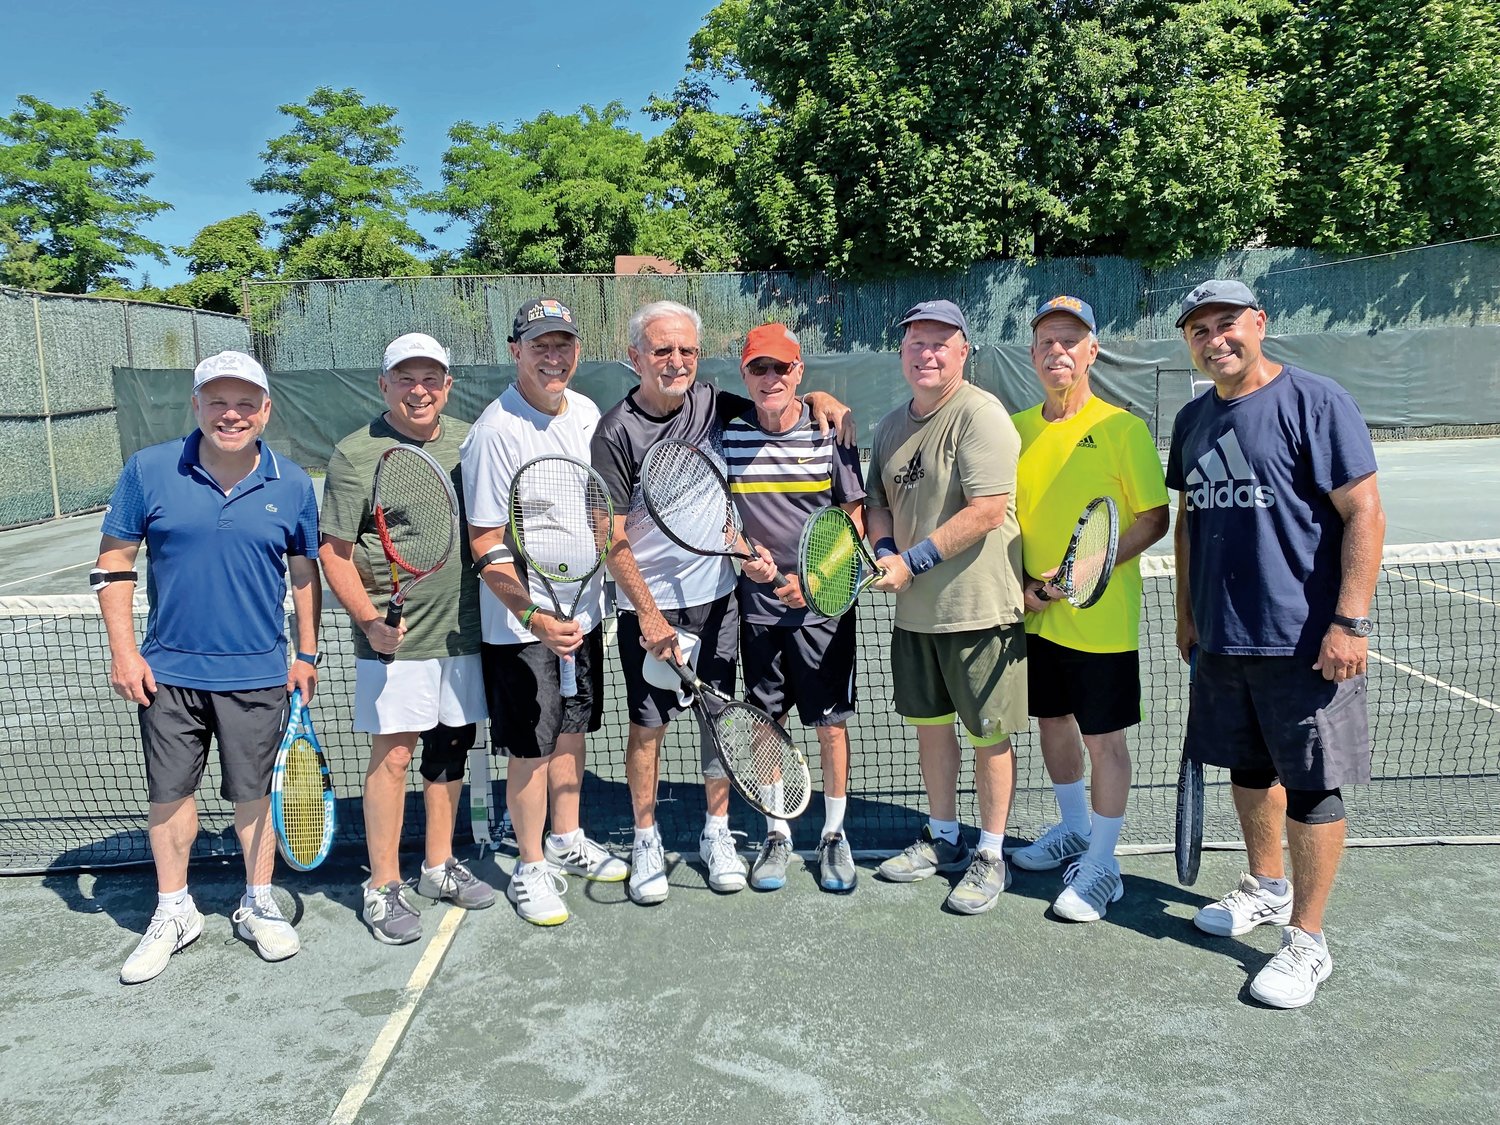 The July 4 men’s tennis competition at the Lawrence Yacht & Country Club included runners up Gary Goffner, far right, Marty Friedman, Ken Frost and Anthony Genovese, then the winners Henry Blummer. Dennis Miller, David Betron and Rafael Zabihi.